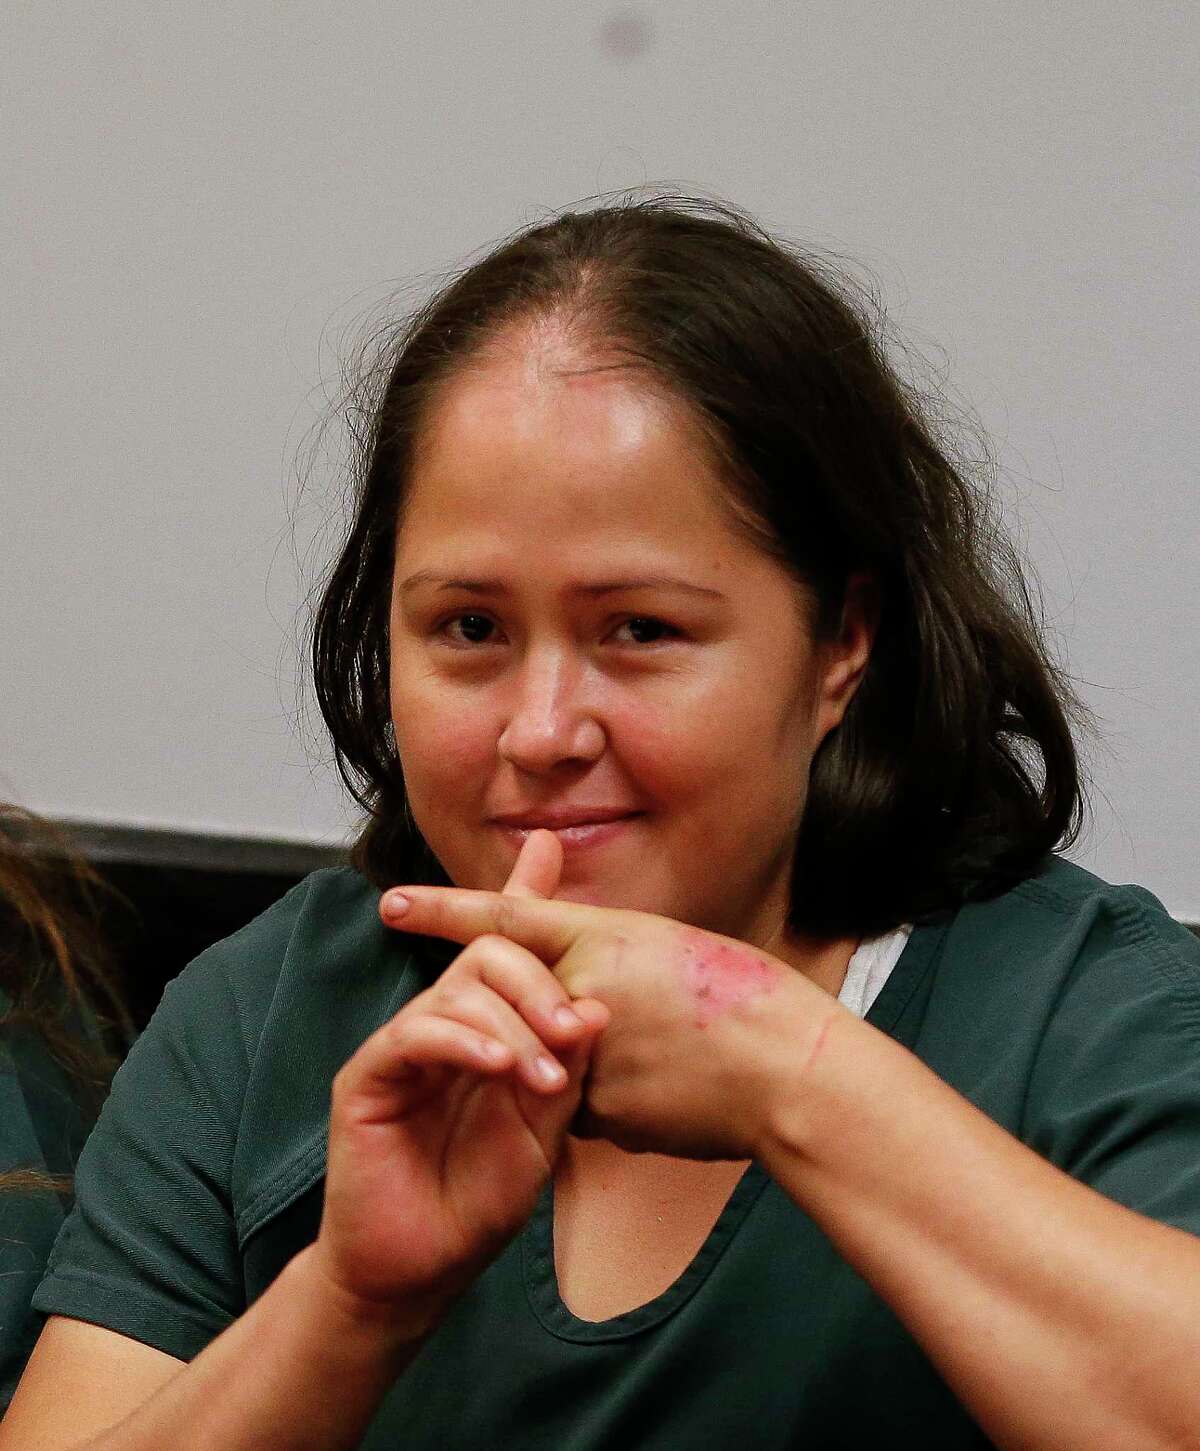 Isabel Martinez gestures towards news cameras during her first court appearance Friday, July 7, 2017, in Lawrenceville, Ga. Martinez is charged with killing four of her of children and their father. (AP Photo/John Bazemore)